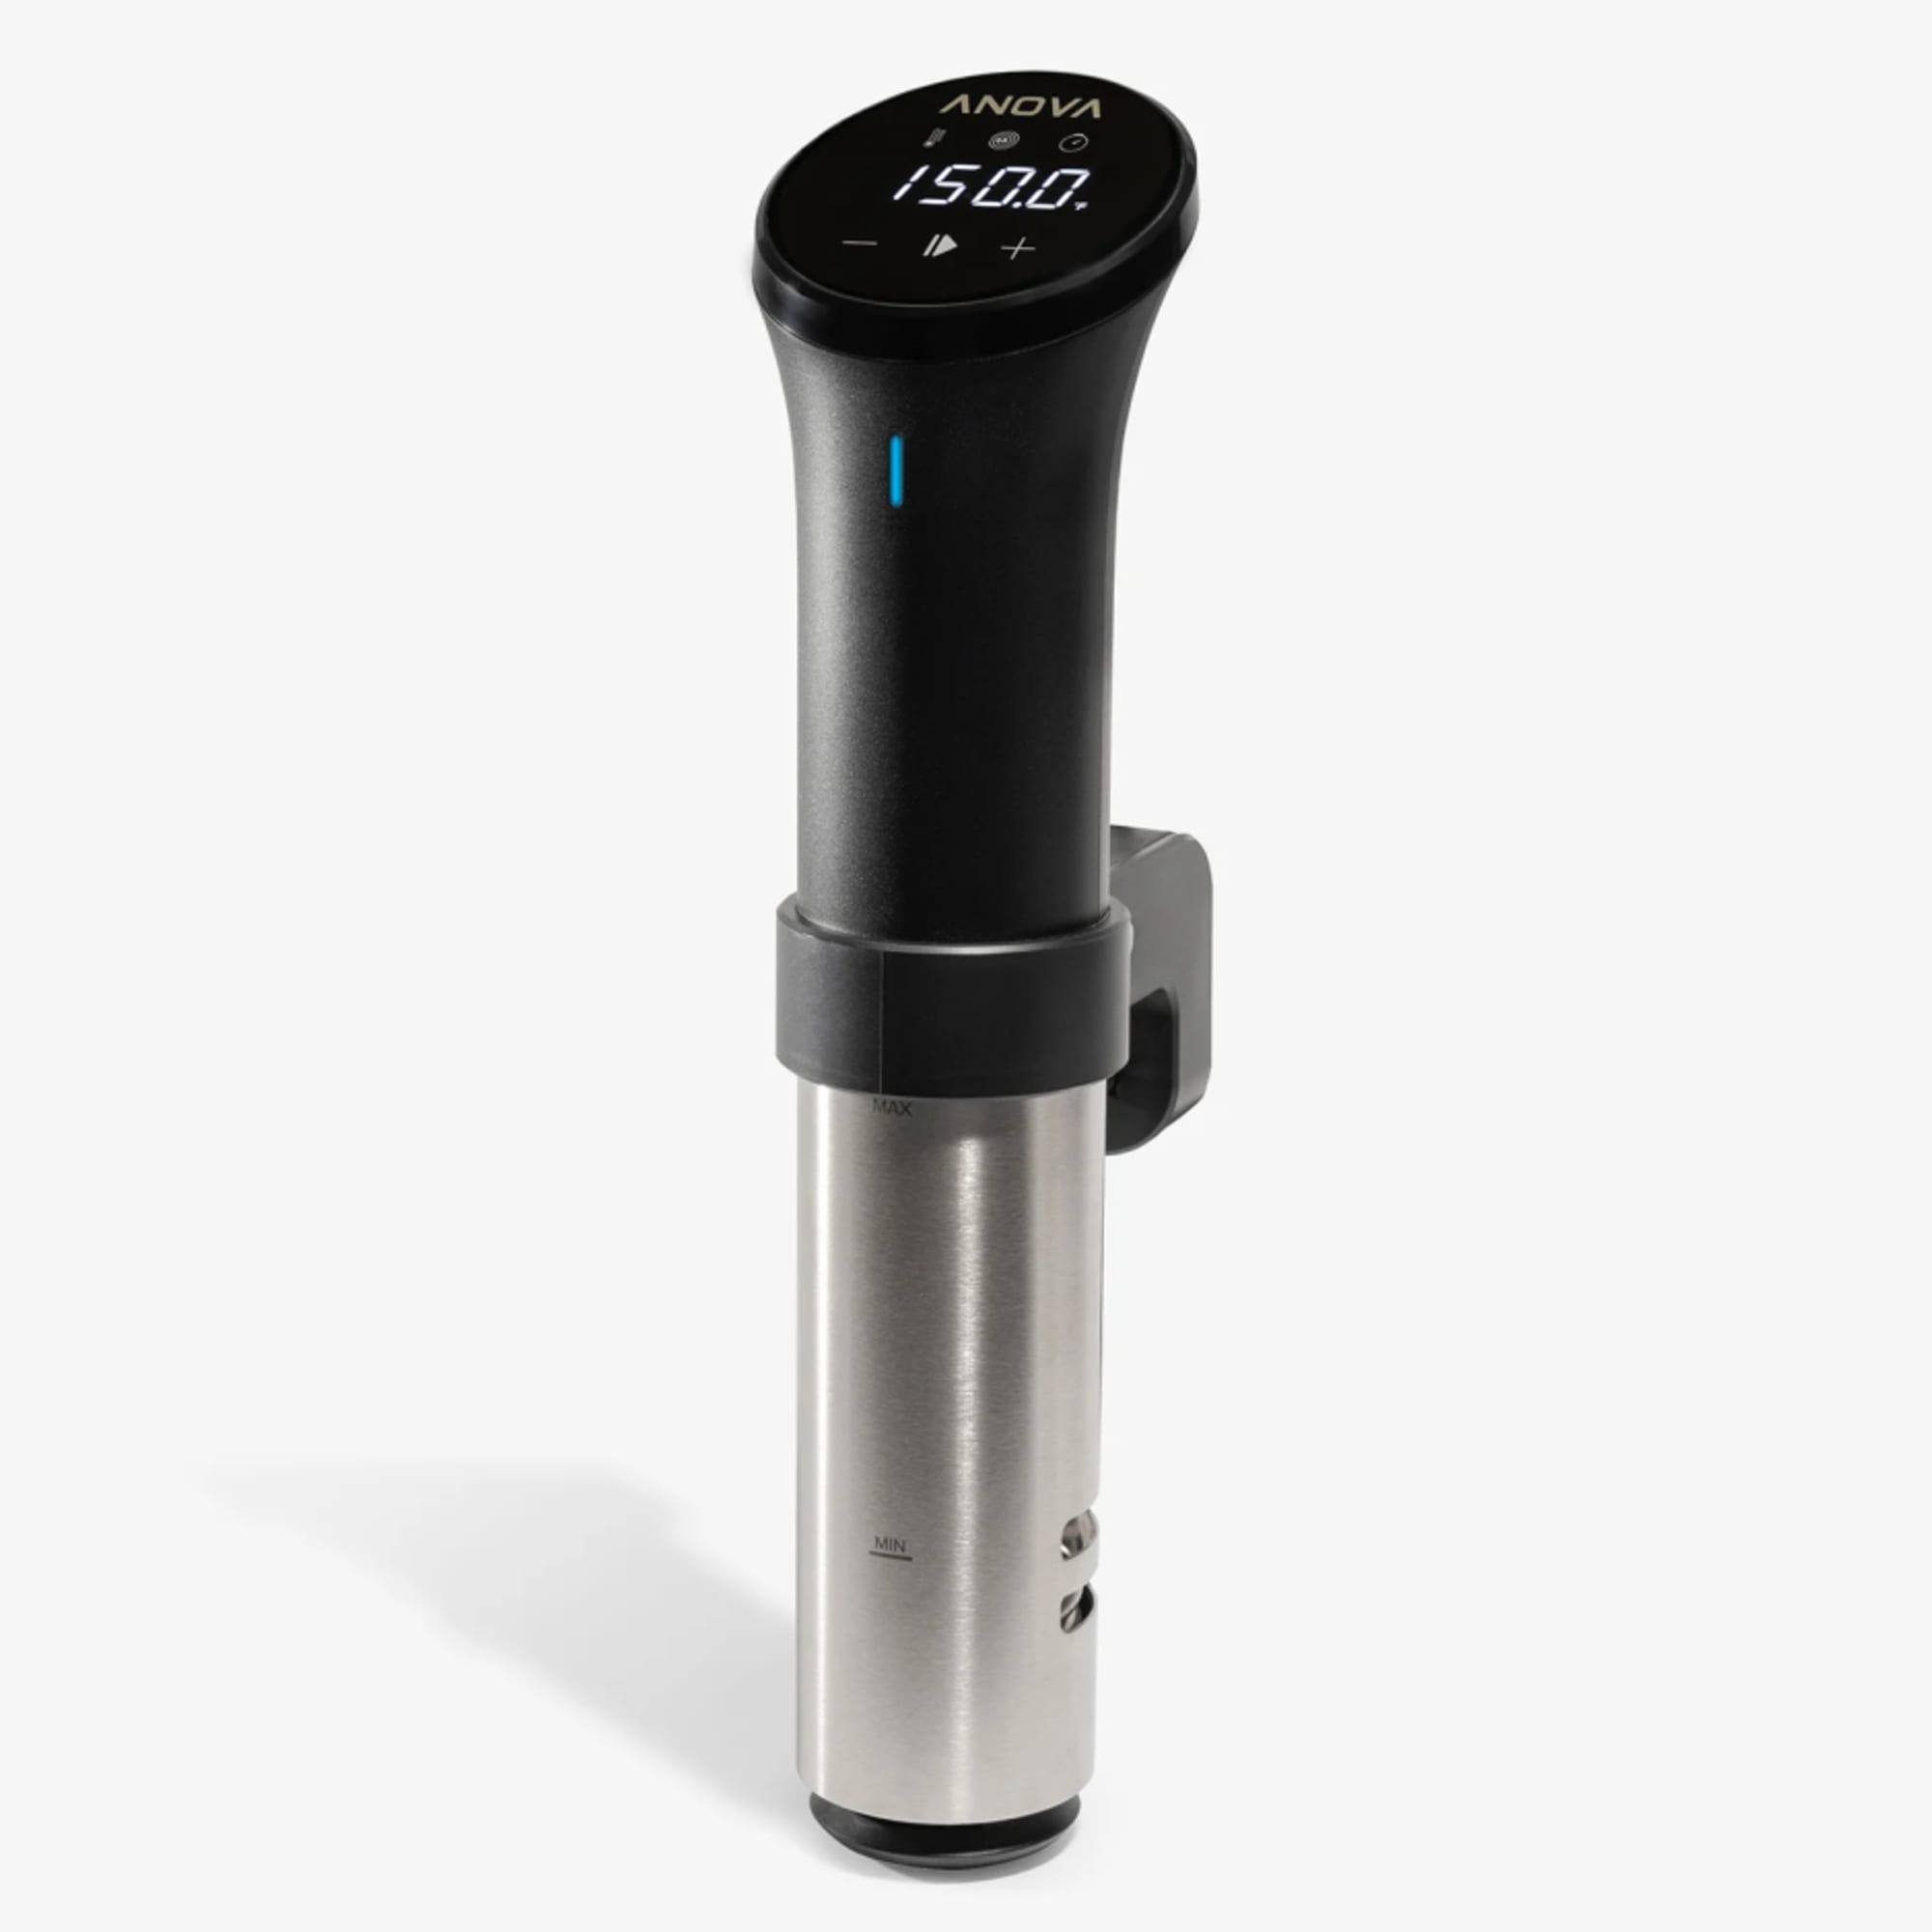 Anova Sous Vide Kit Cooker and Container Bundle Image 10